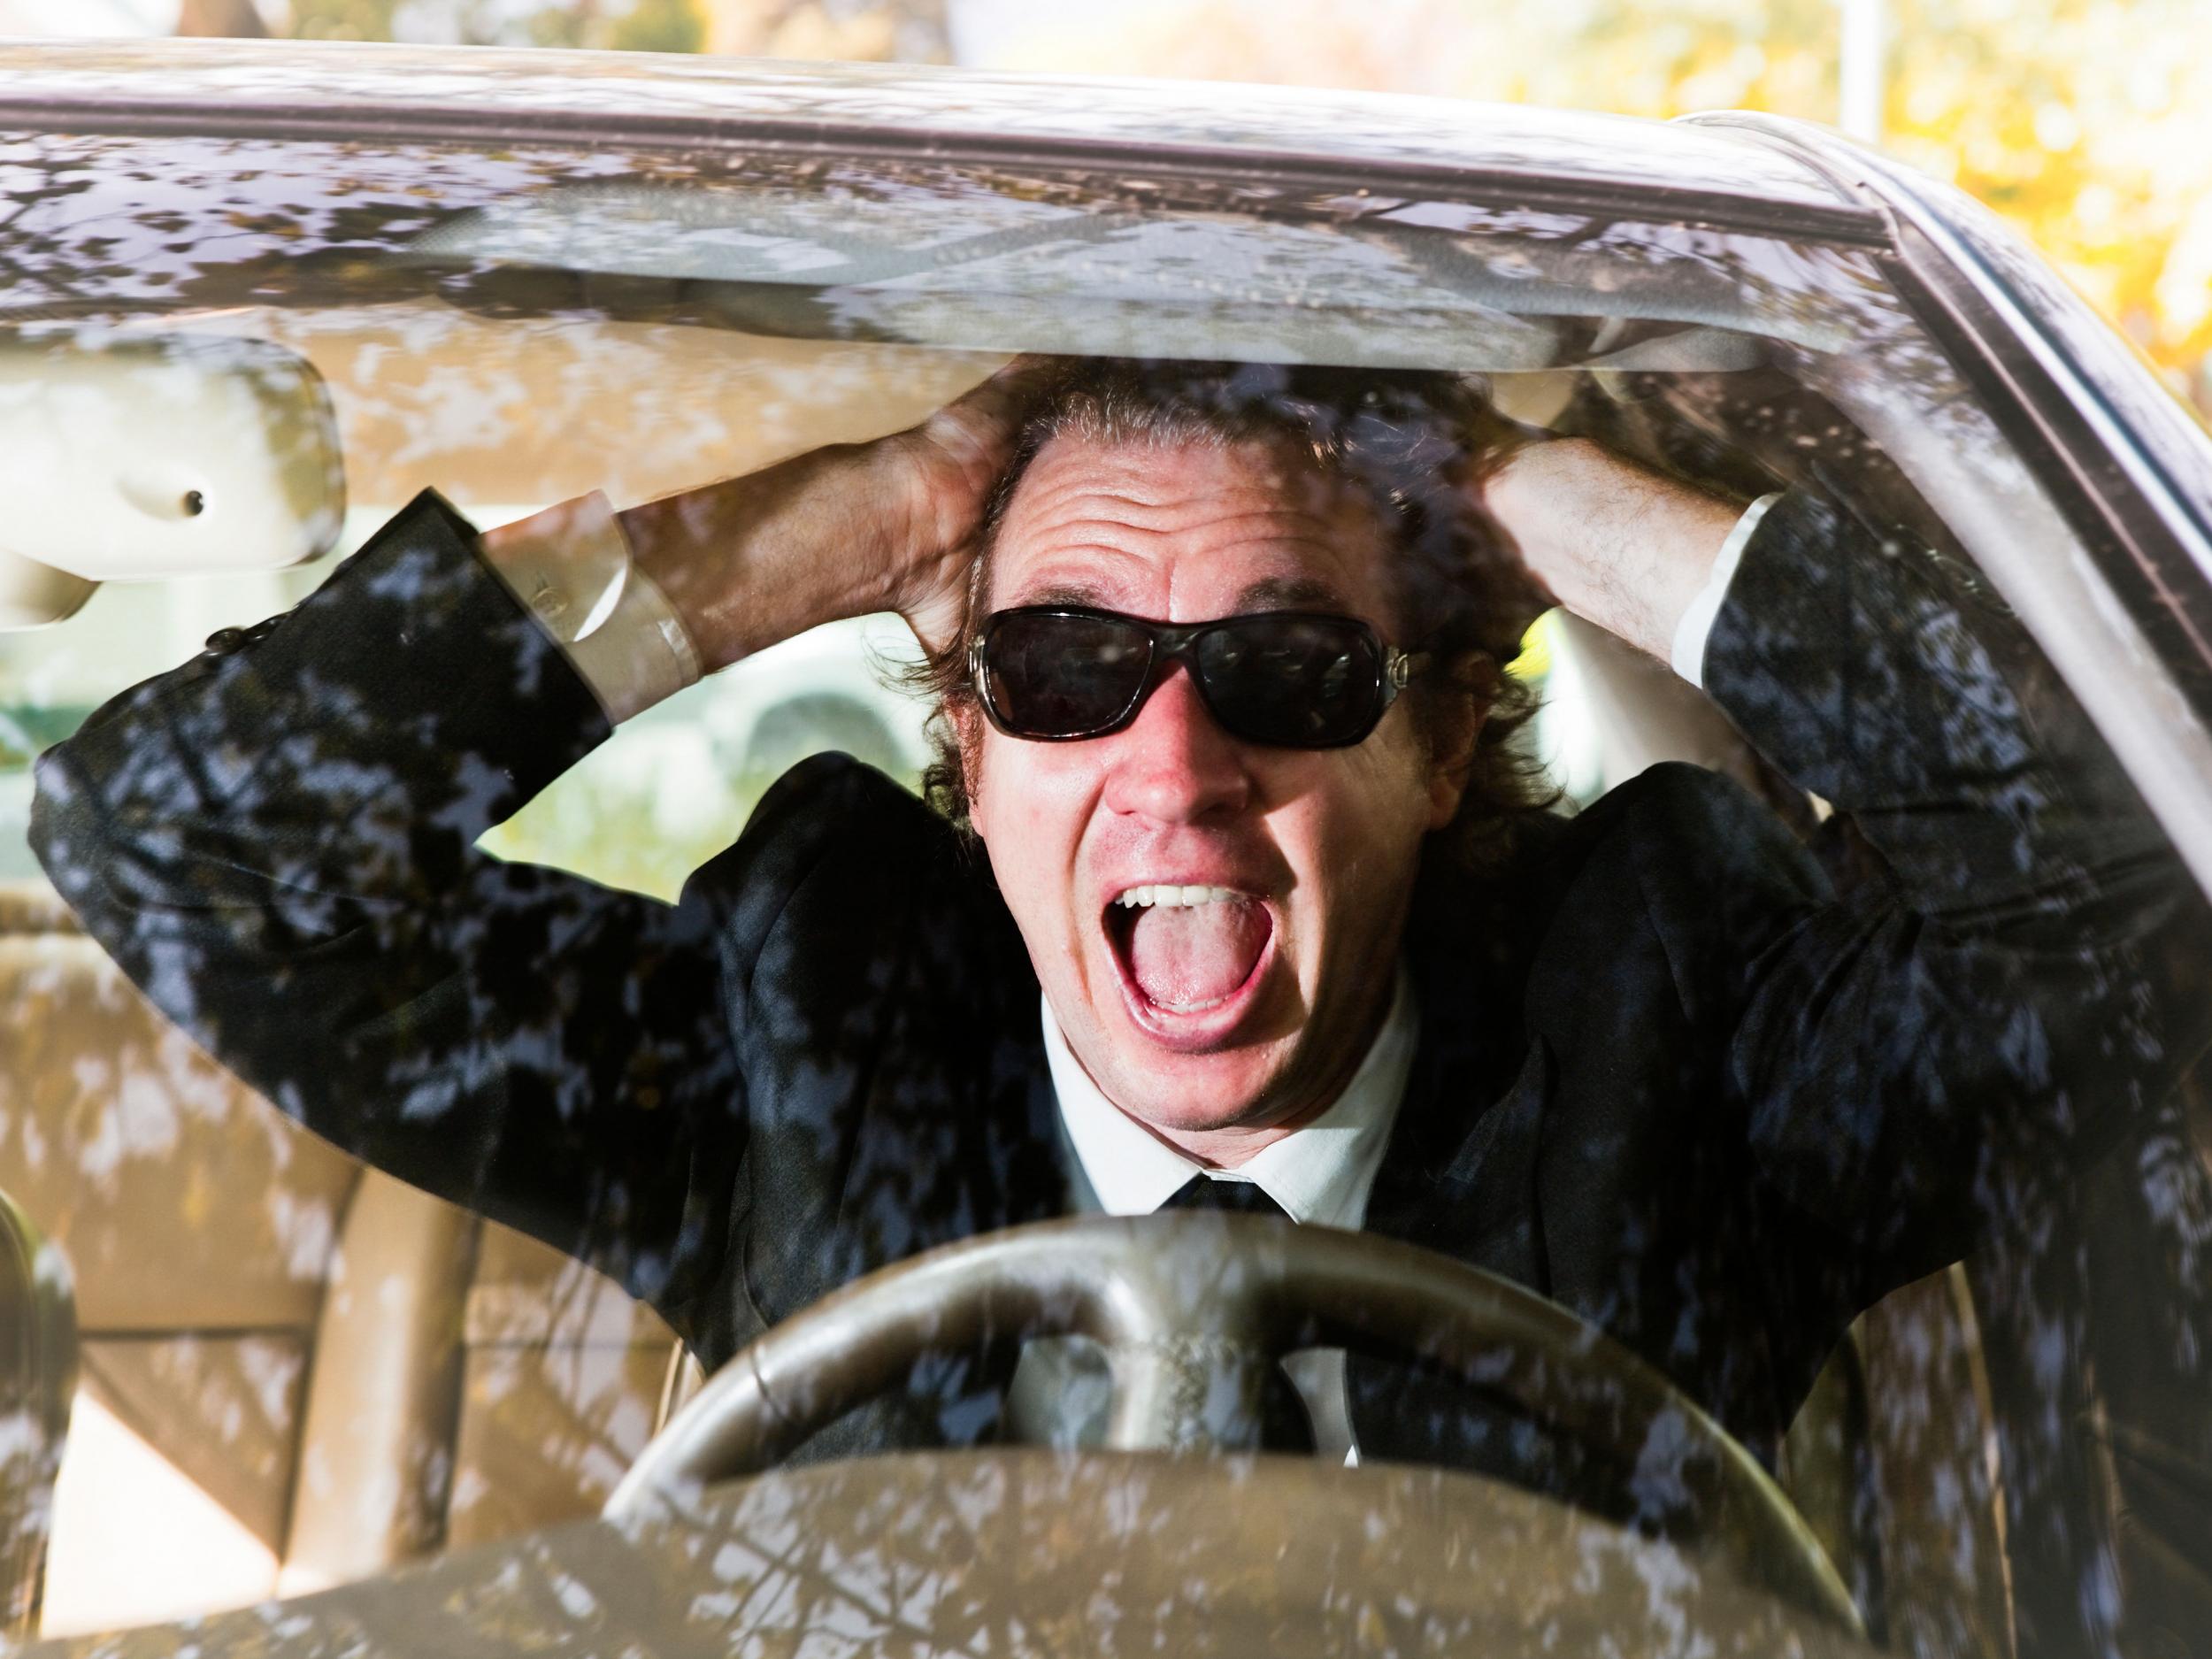 Anger increases someone's susceptibility of colliding on the road